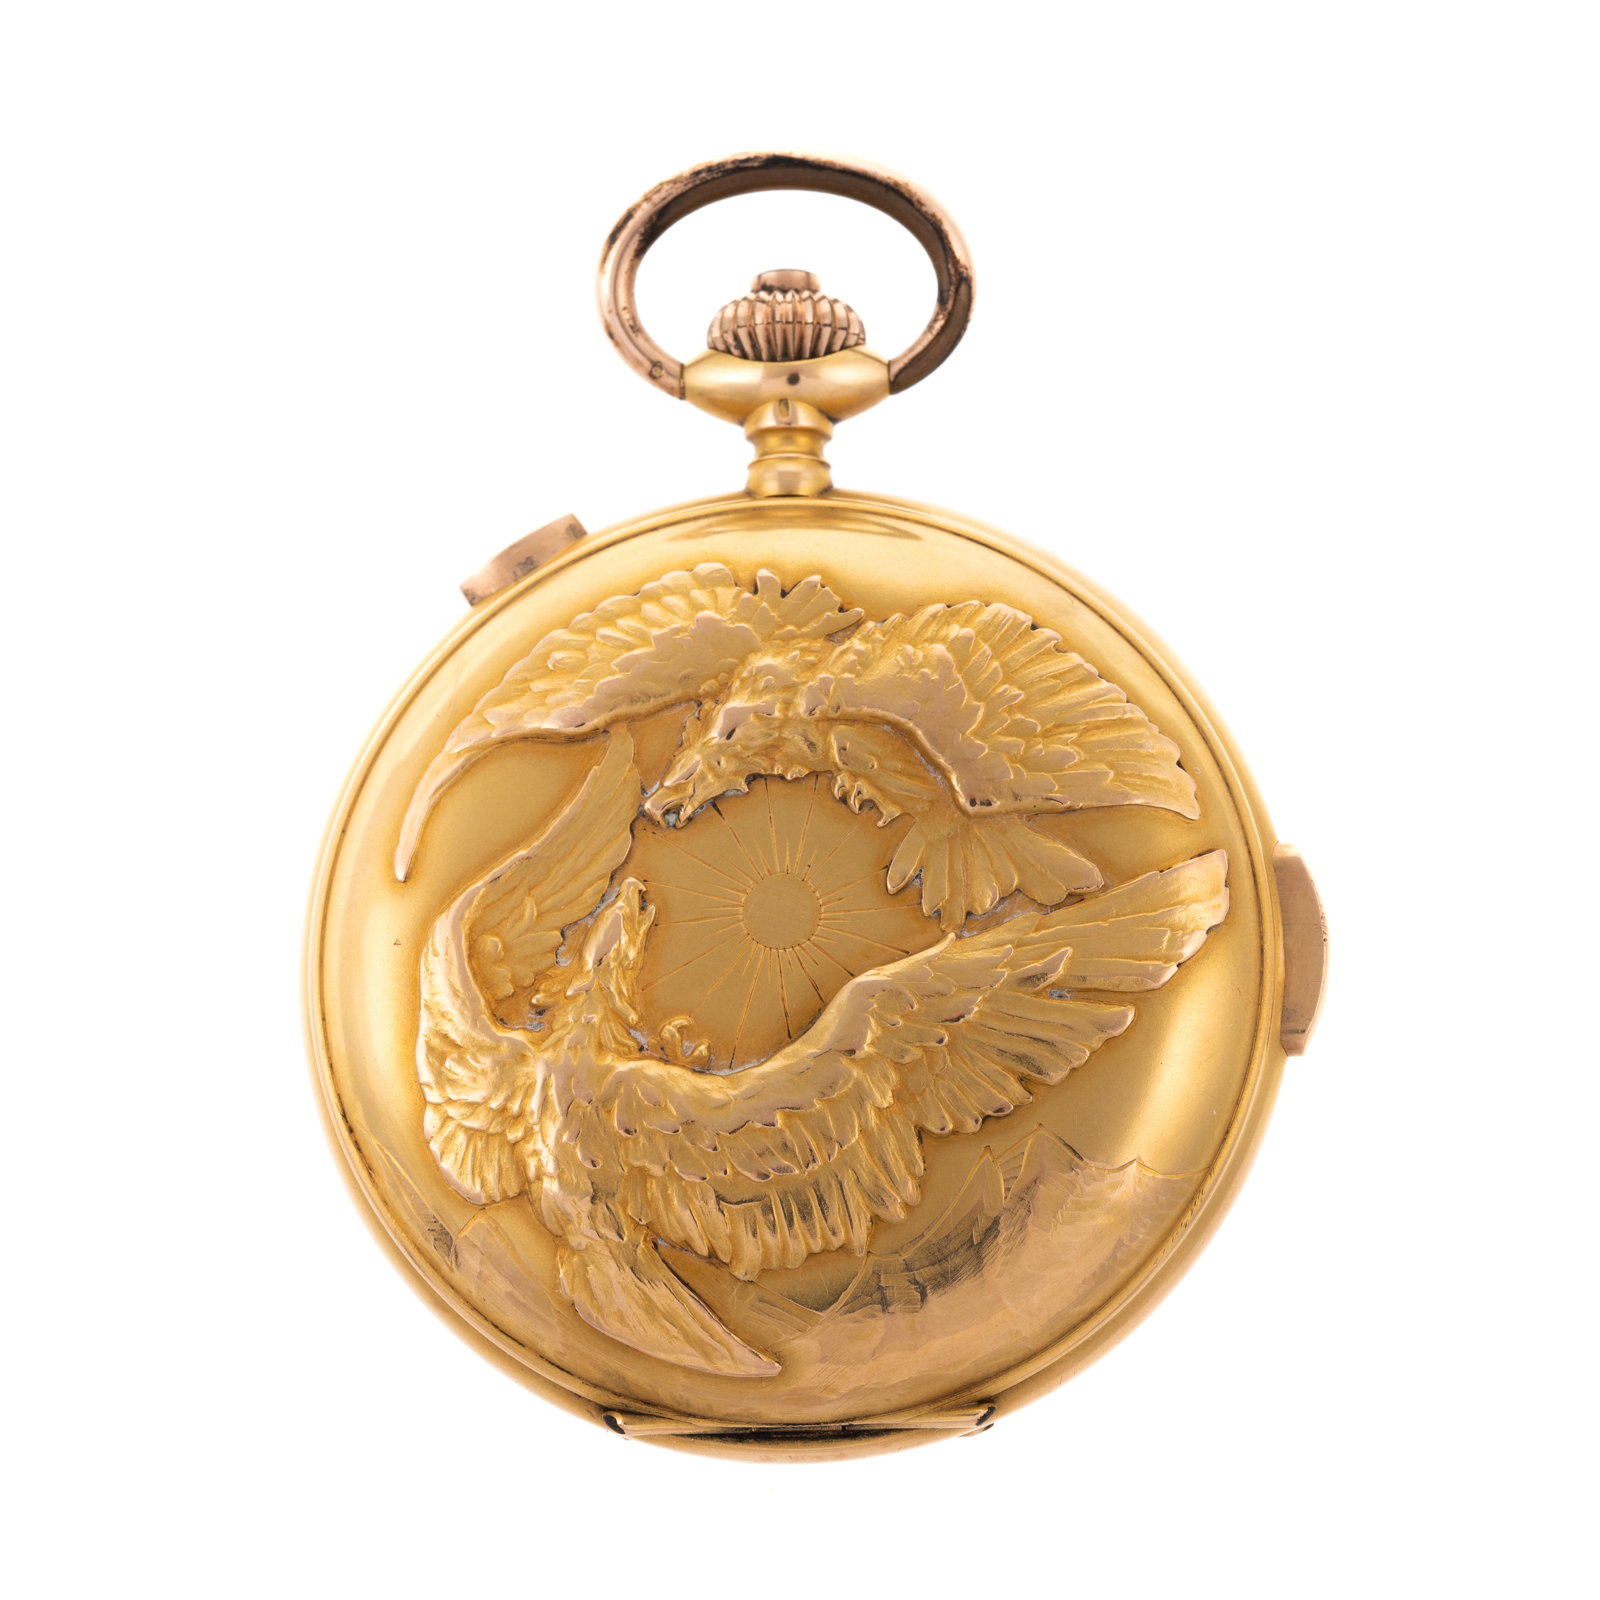 A C 1900 REPEATER POCKET WATCH 3348eb